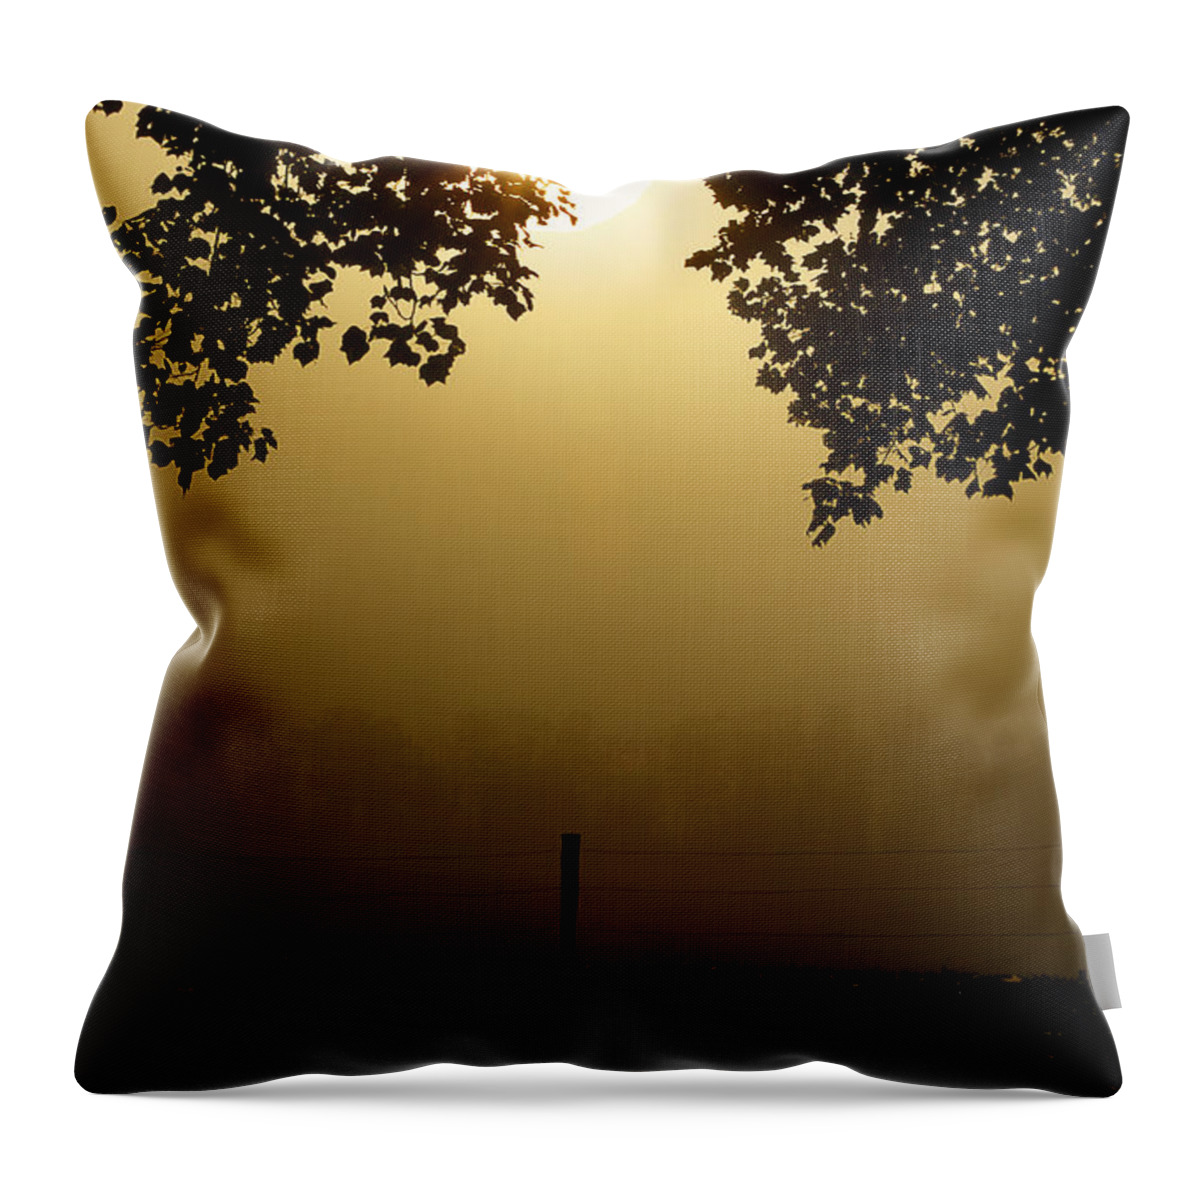 Cades Cove Throw Pillow featuring the photograph Shining Through The Fog by Michael Eingle